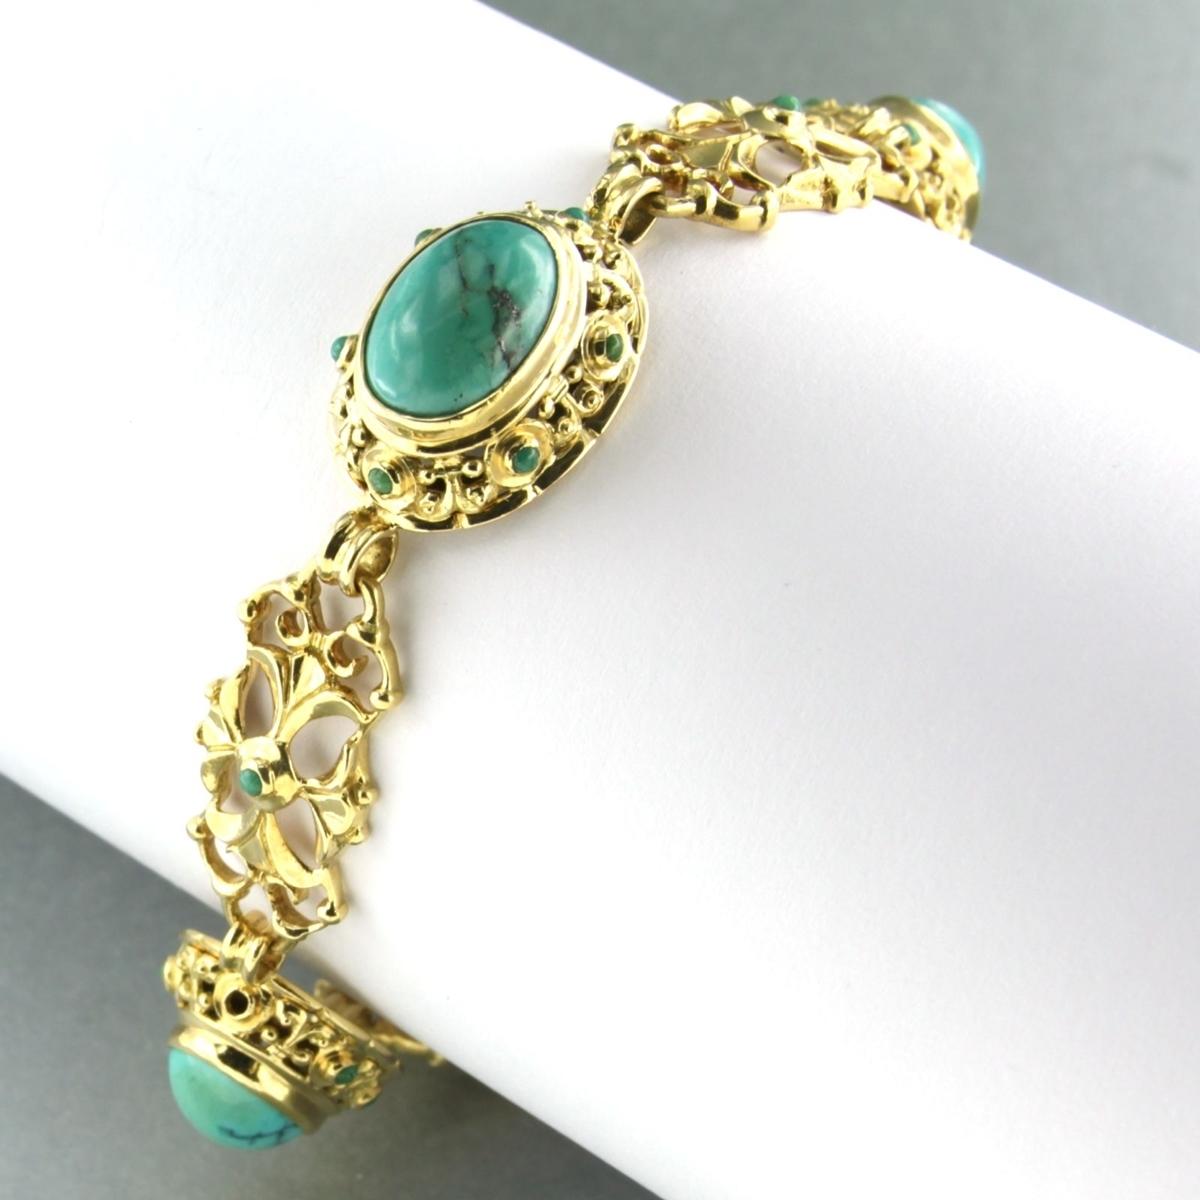 Early Victorian 18k yellow gold bracelet set with turquoise - 18 cm long For Sale